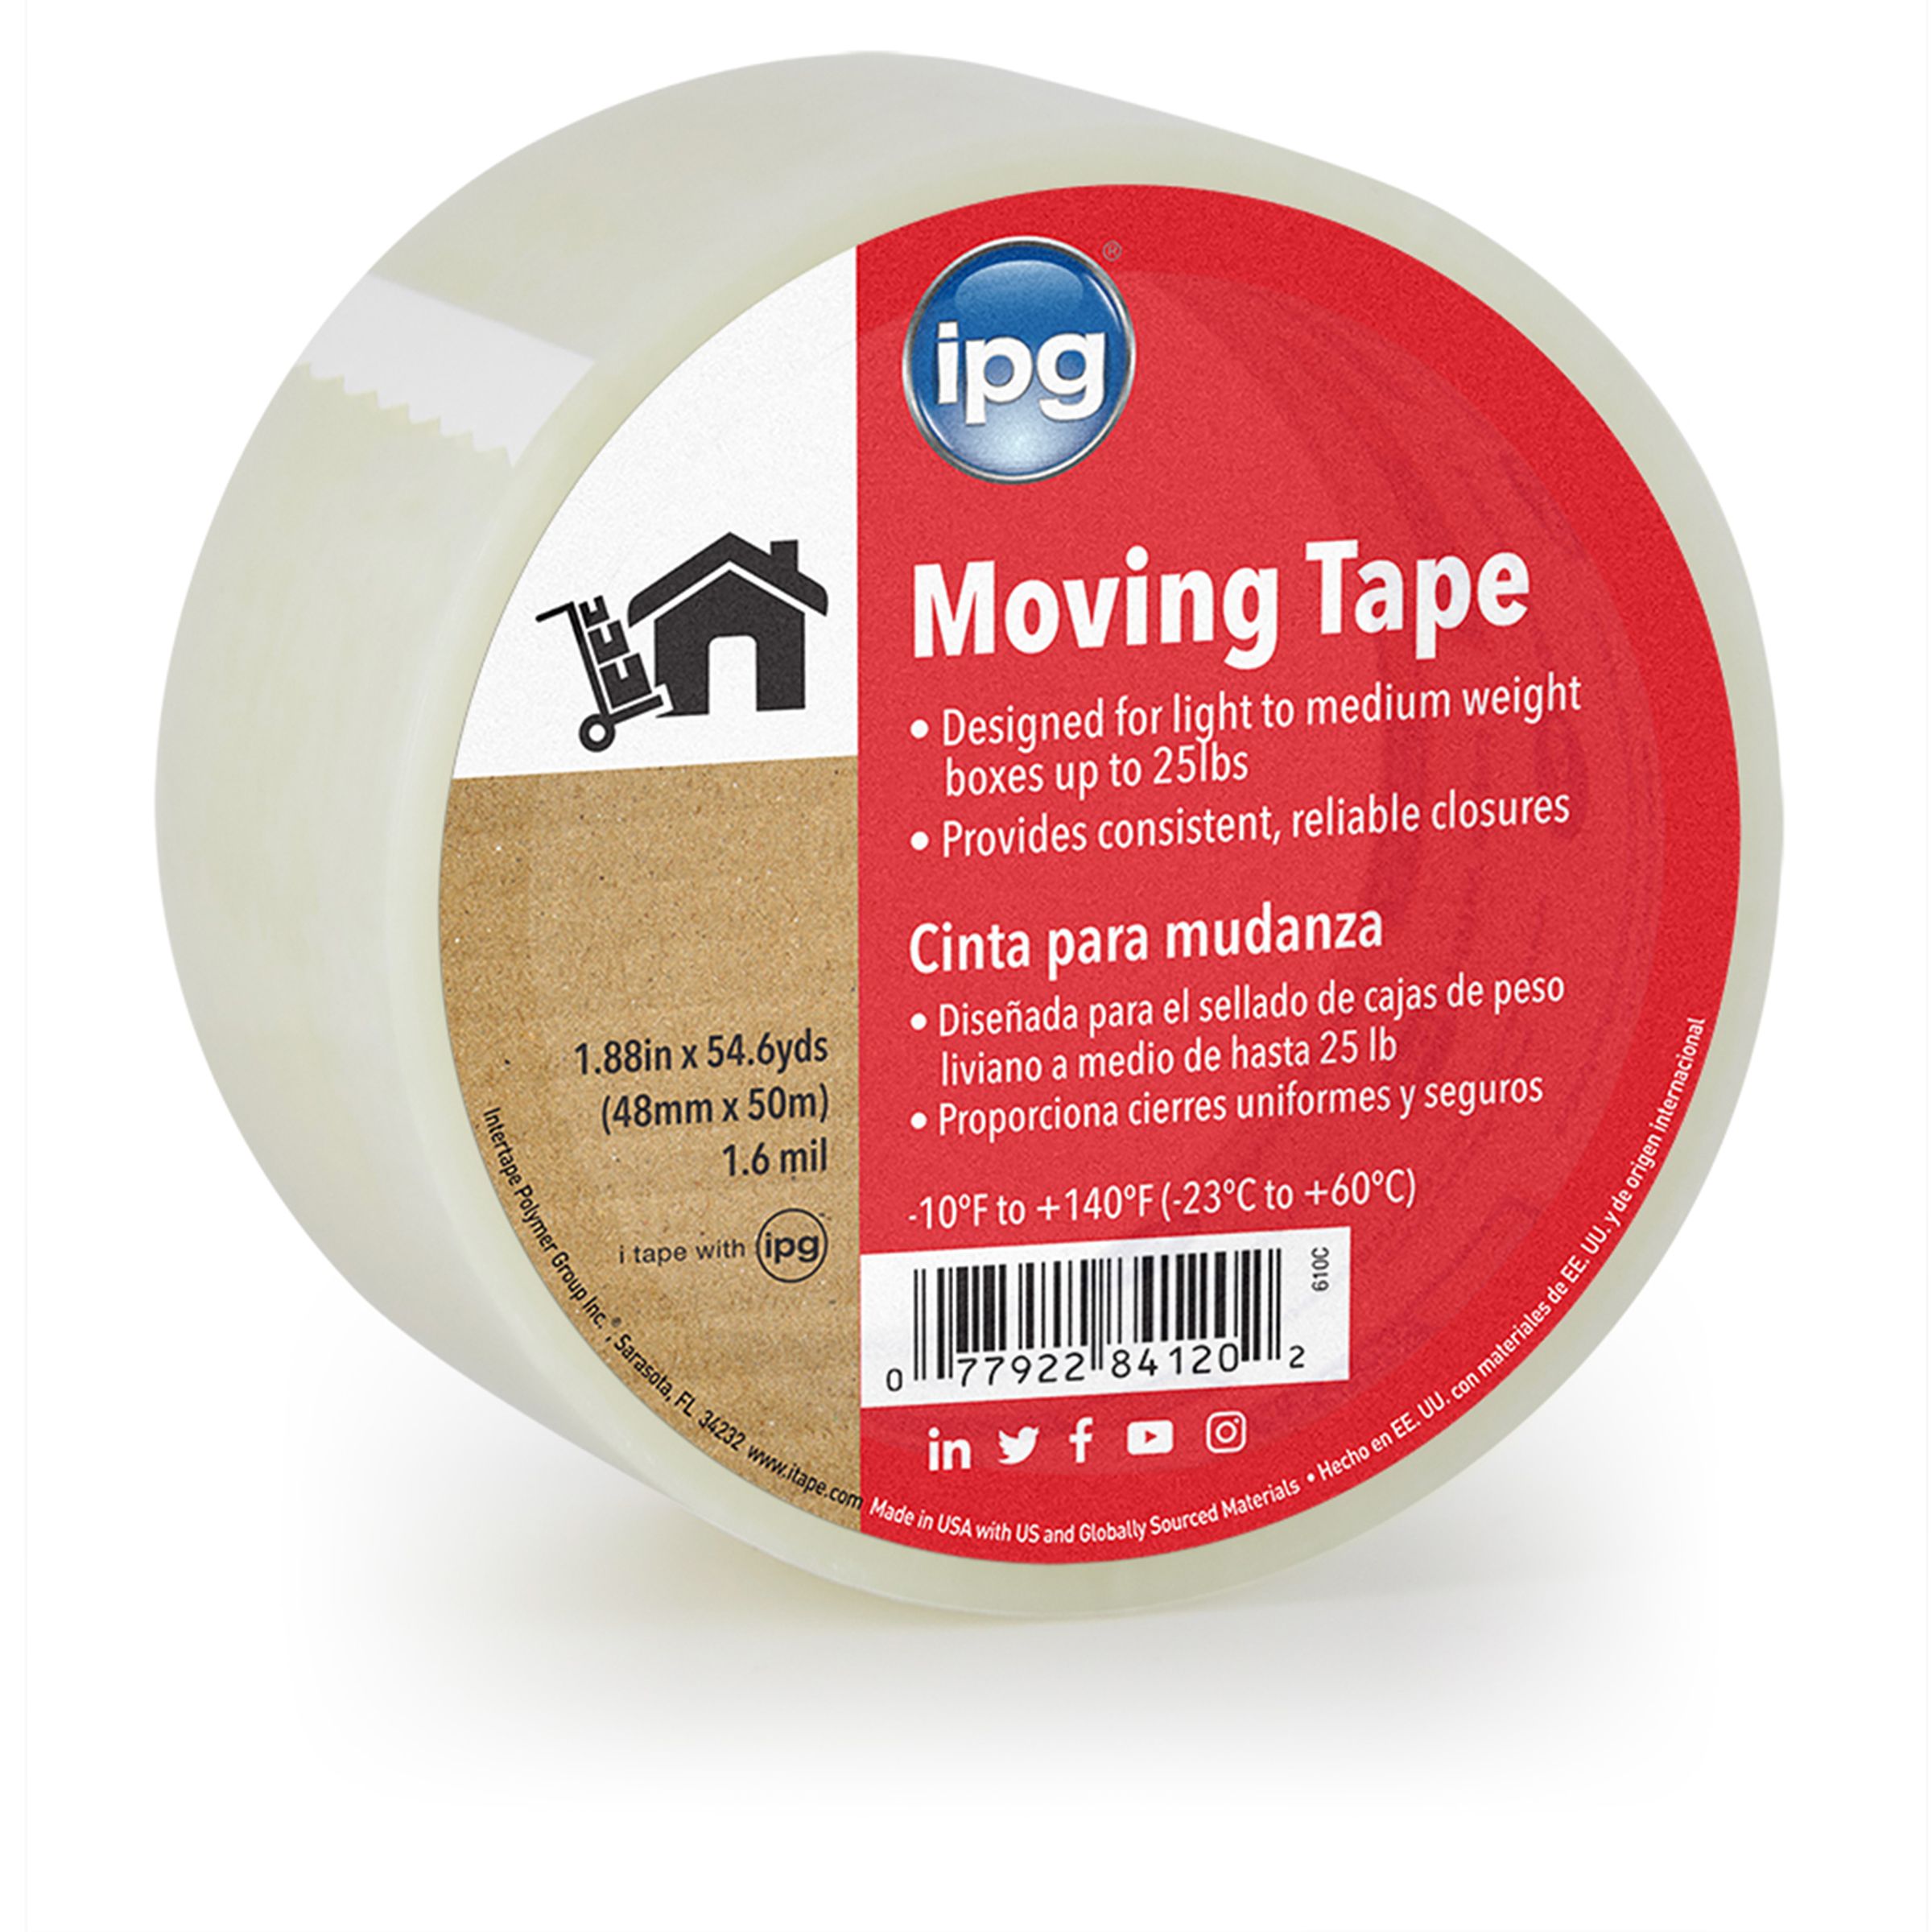 Moving Tape - IPG